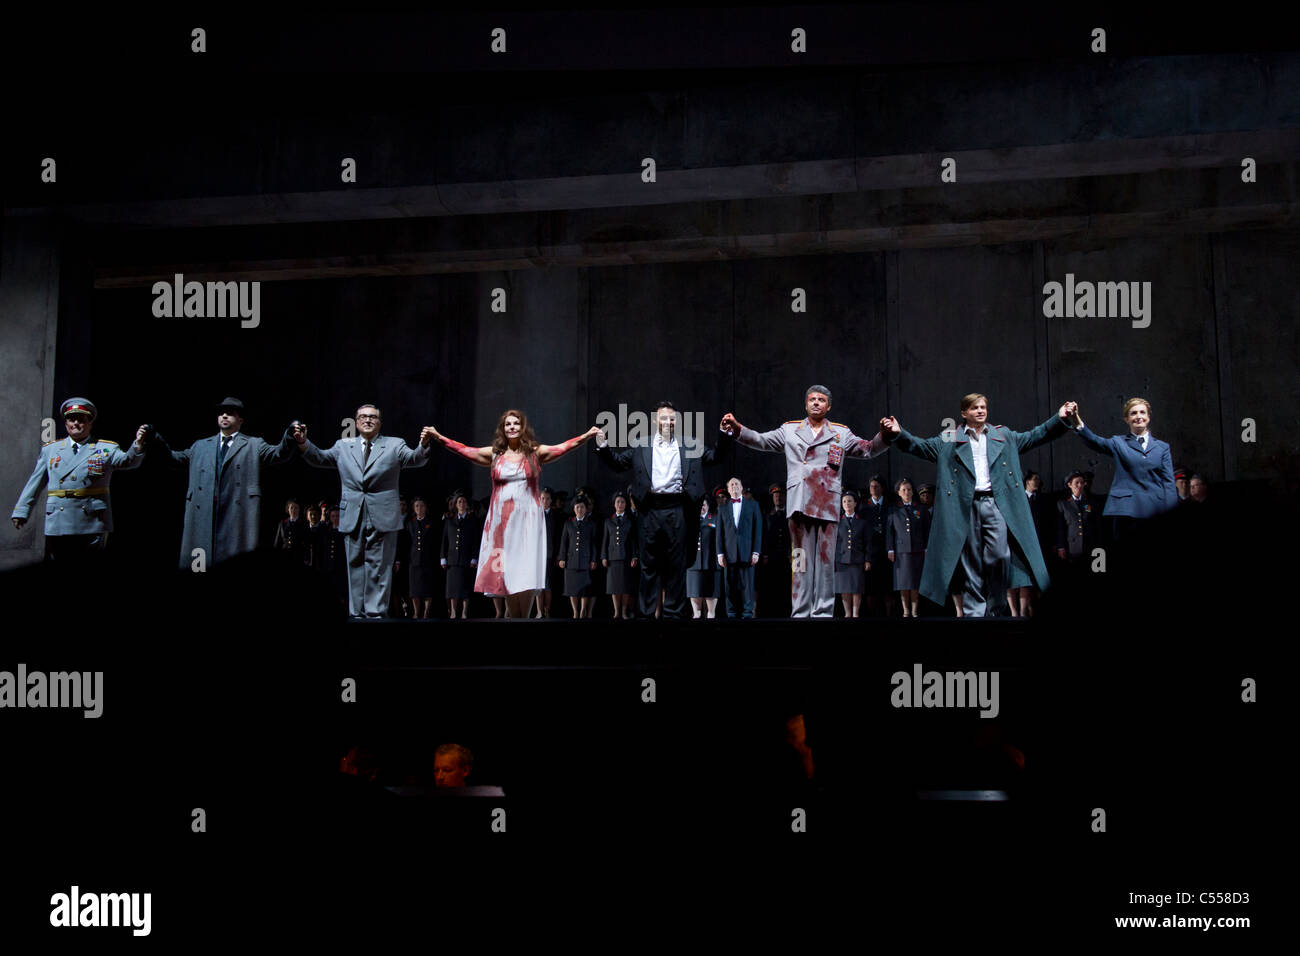 curtain call of conductor with cast at performance of Verdi's Macbeth at the Deutsche Oper, Berlin, Germany Stock Photo